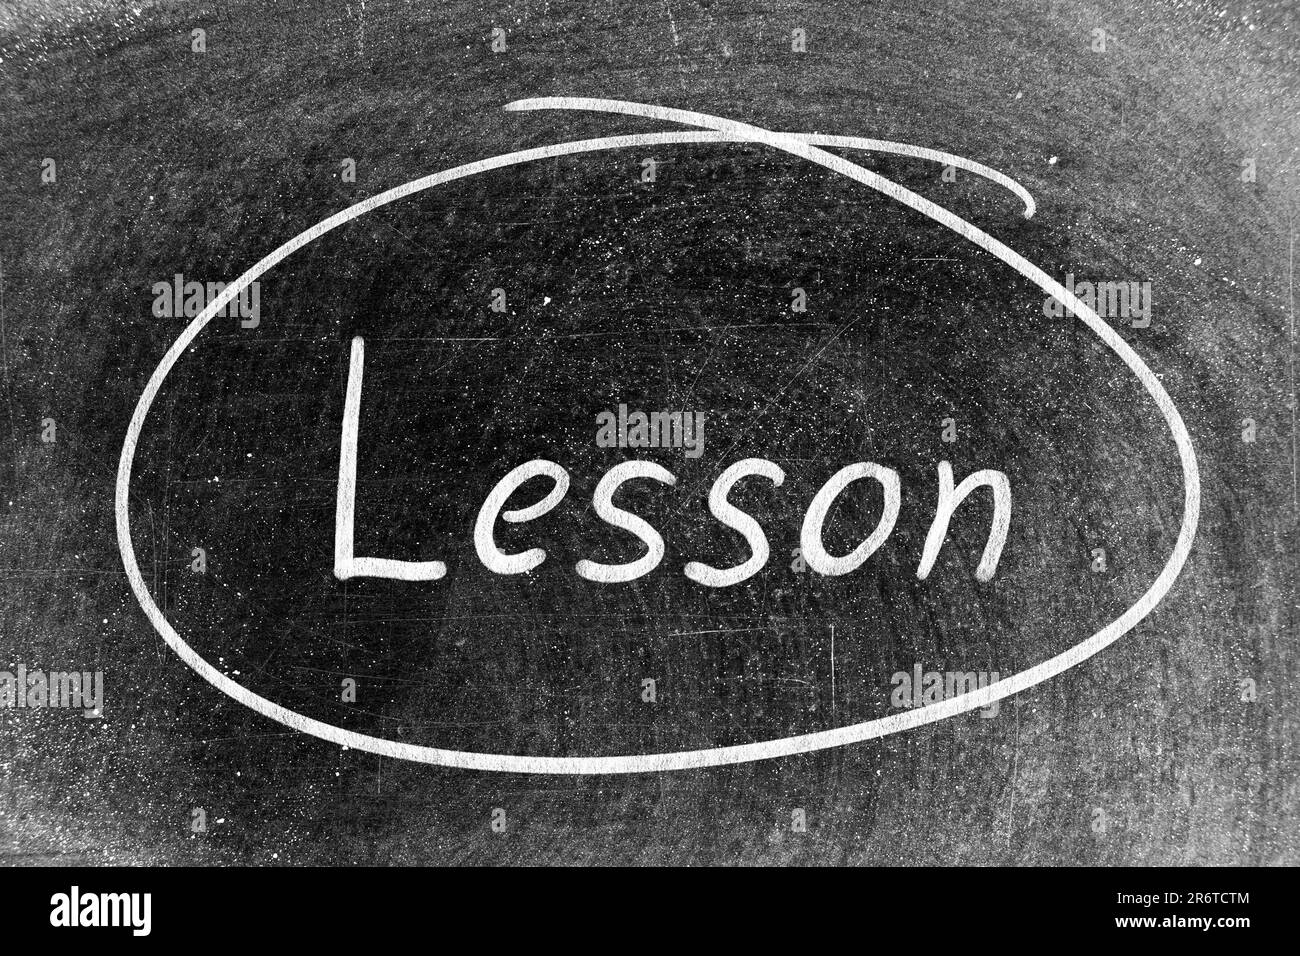 White chalk hand writing in word lesson and circle shape on blackboard background Stock Photo